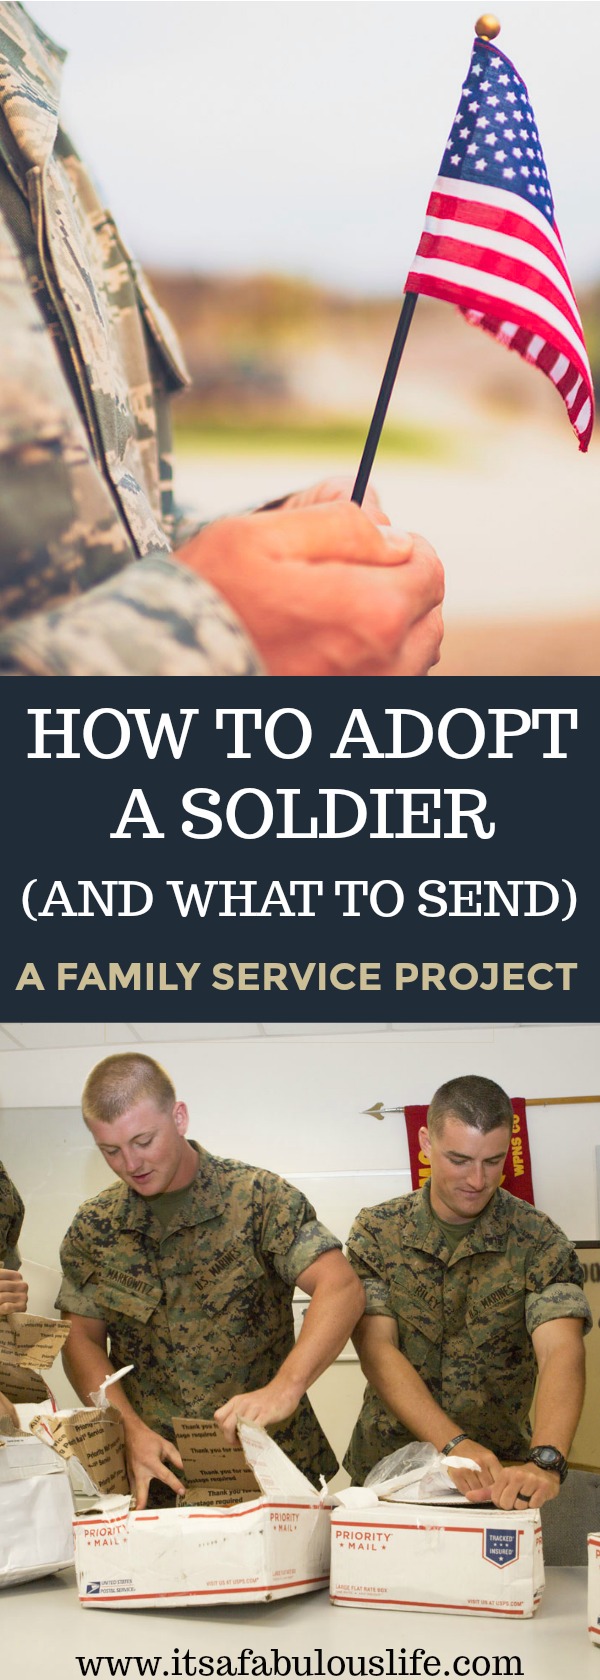 How To Adopt A Soldier And What To Send